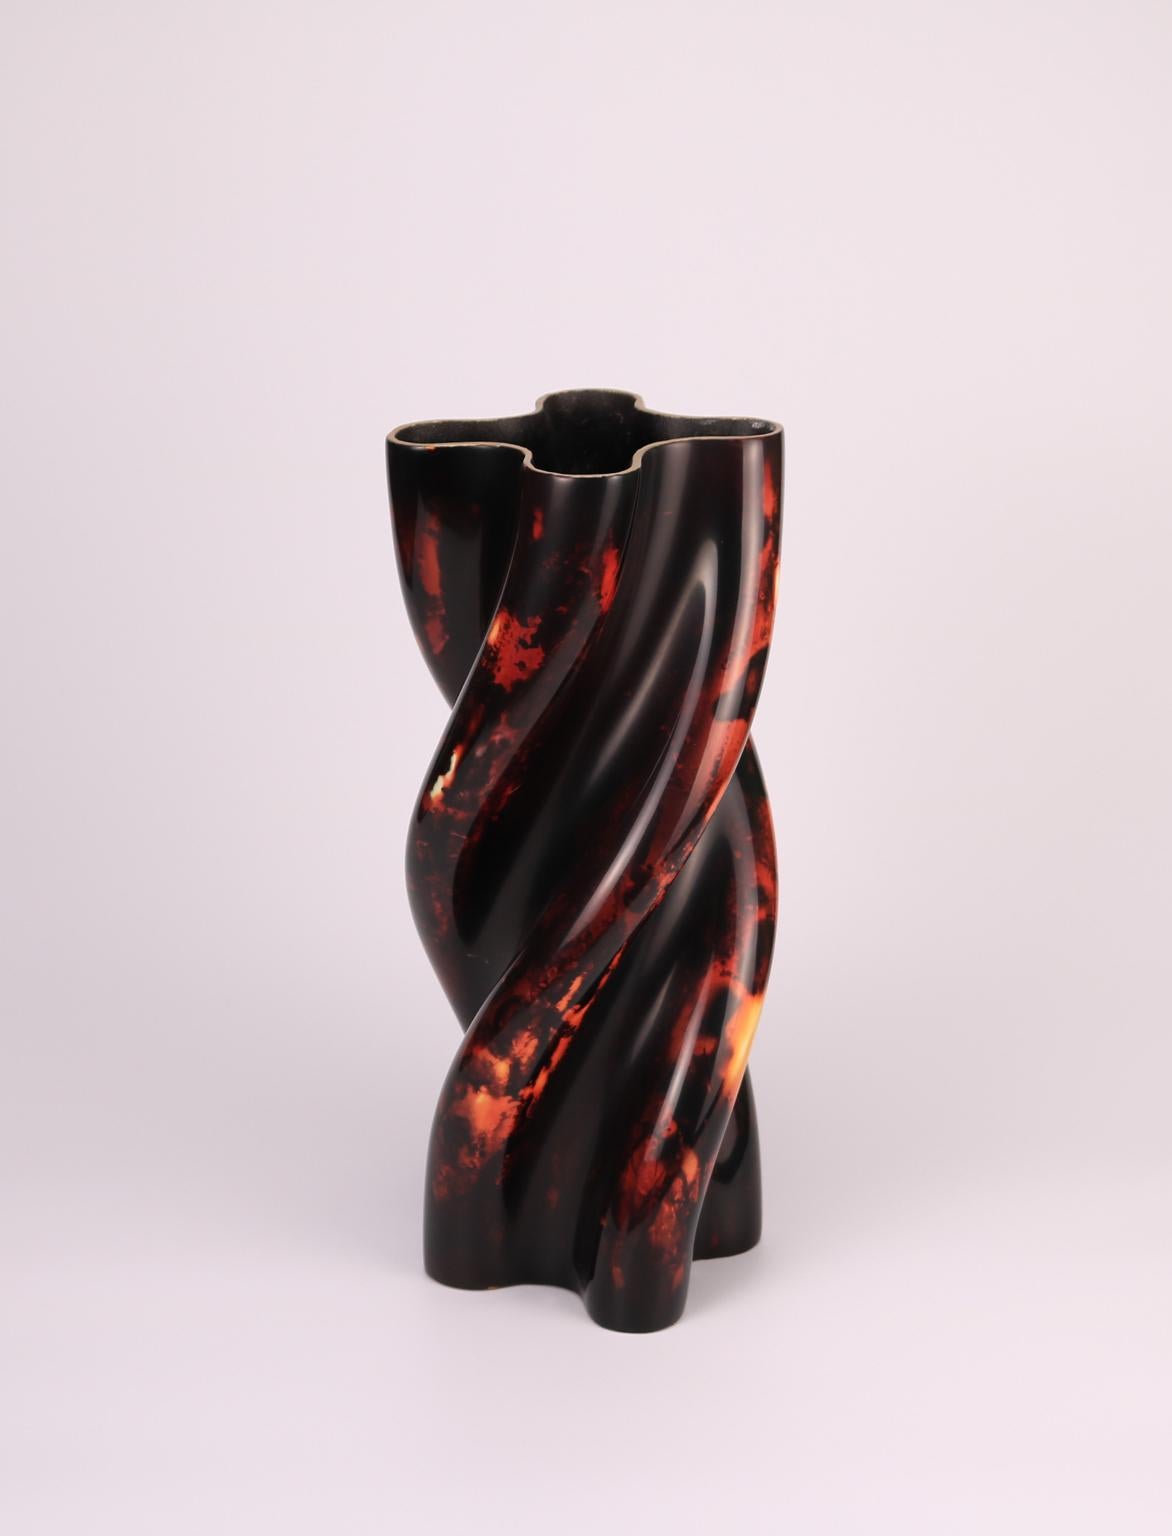 Contemporary lacquered ceramic vessel by Golem of Italy, handmade ceramic body sinuously shaped with four twirling lobes running from top to bottom, external decoration in museum quality lacquer, a perfectly smooth gloss finish and a very warm color